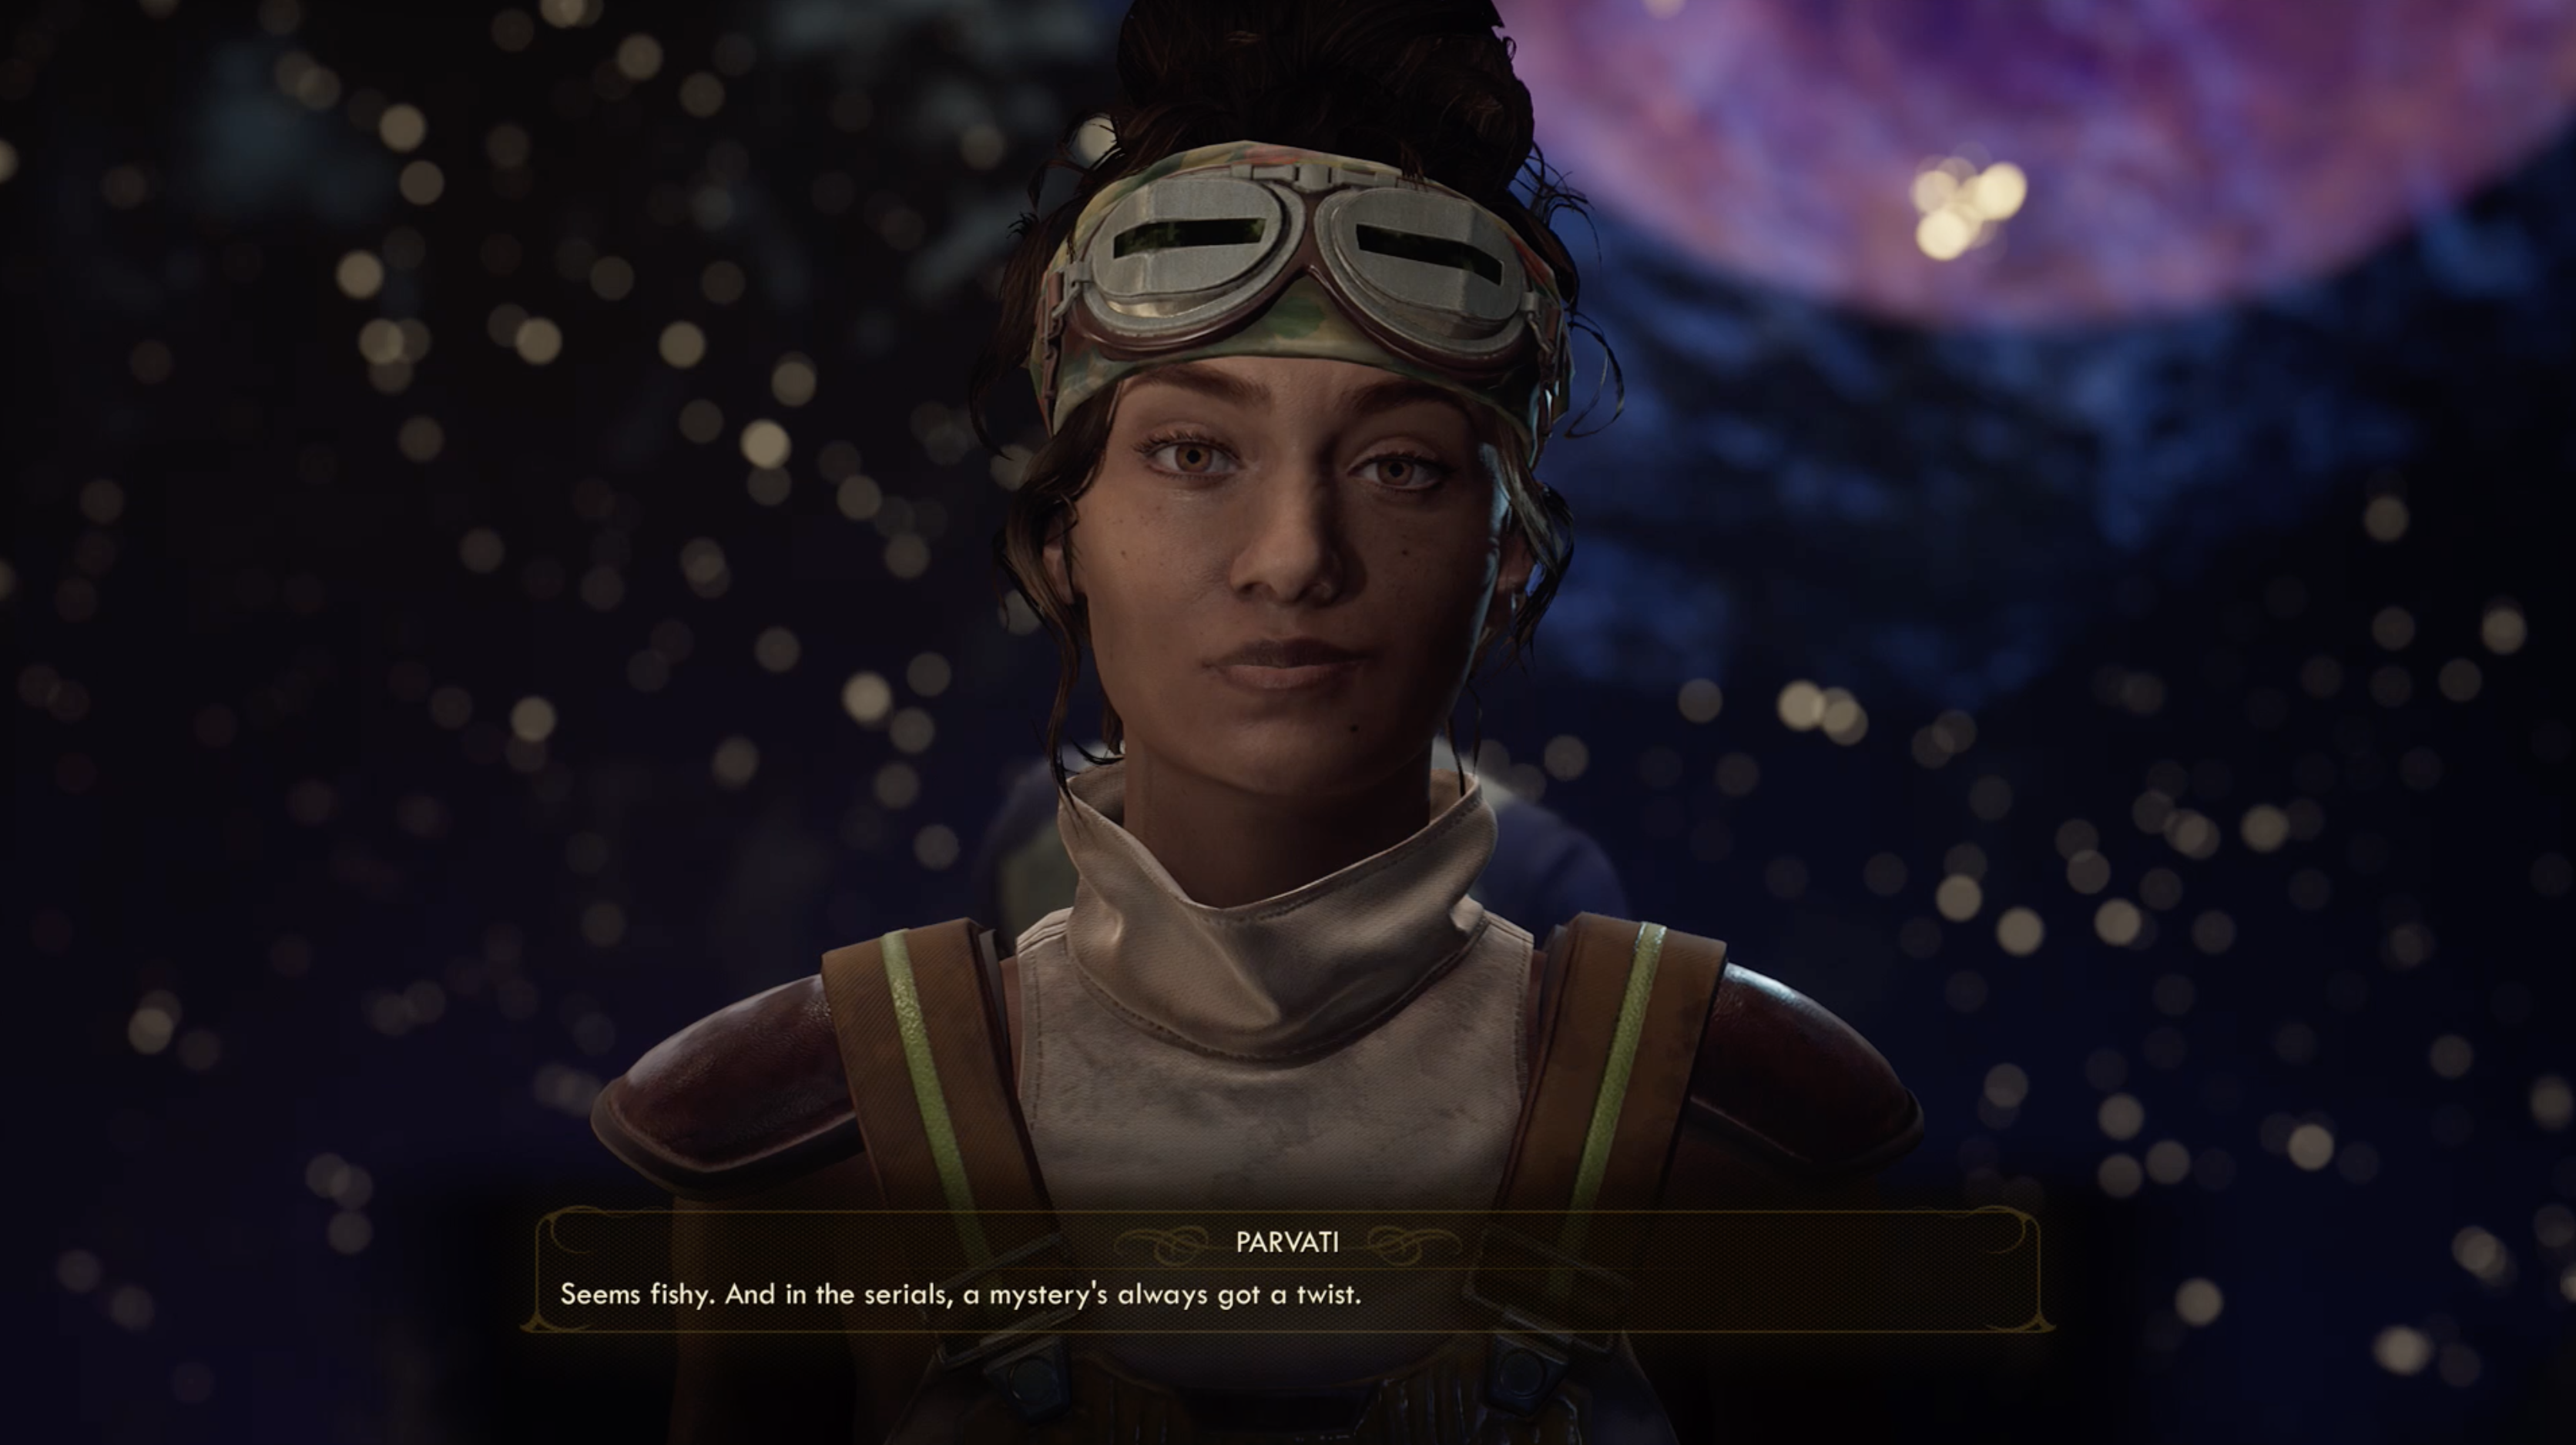 The Outer Worlds: Peril on Gorgon is Out Now on PS4